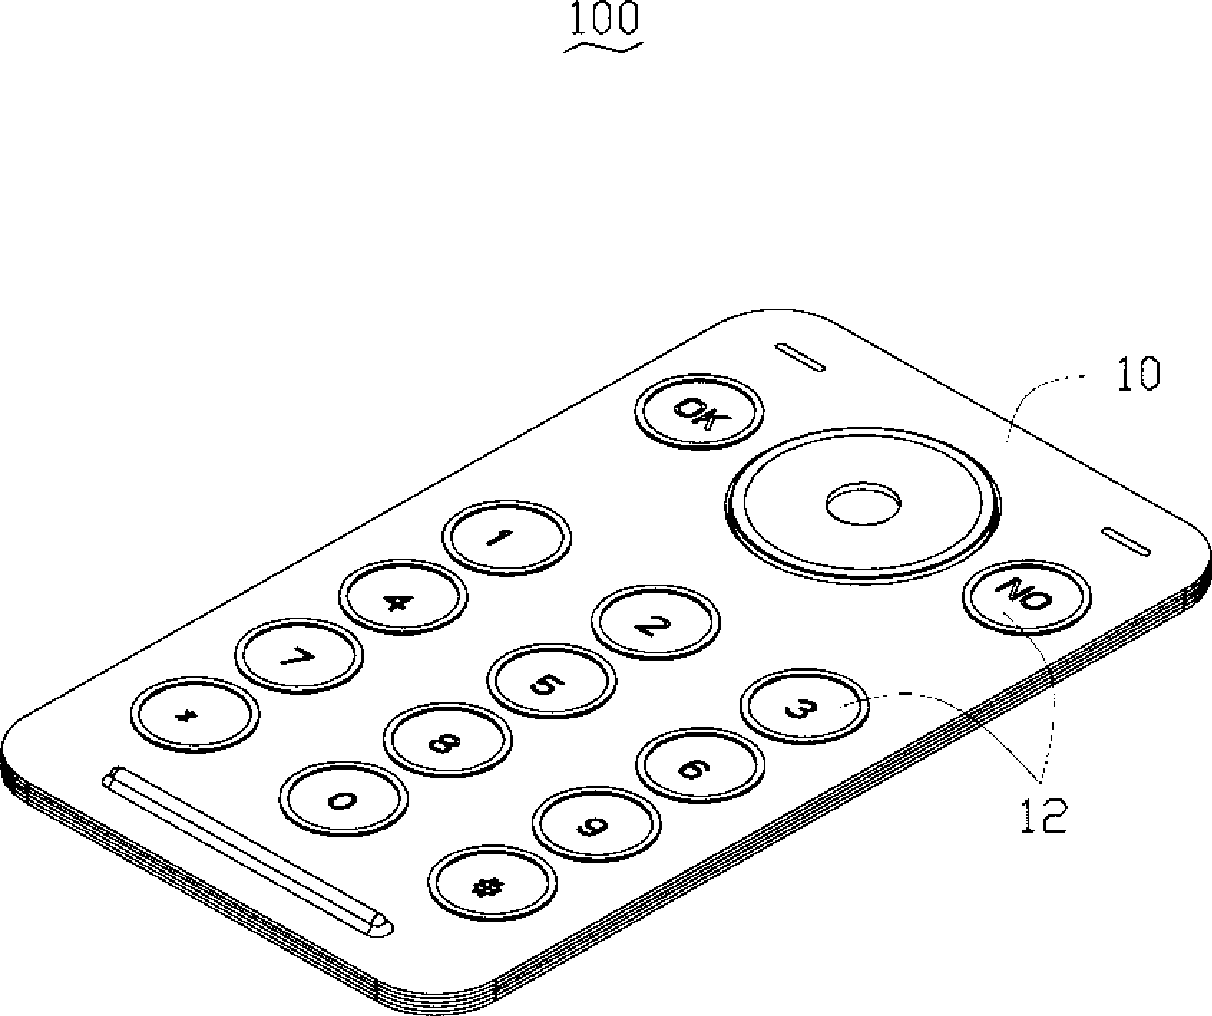 Press-key panel construction for electronic device and method for manufacturing the press-key panel construction